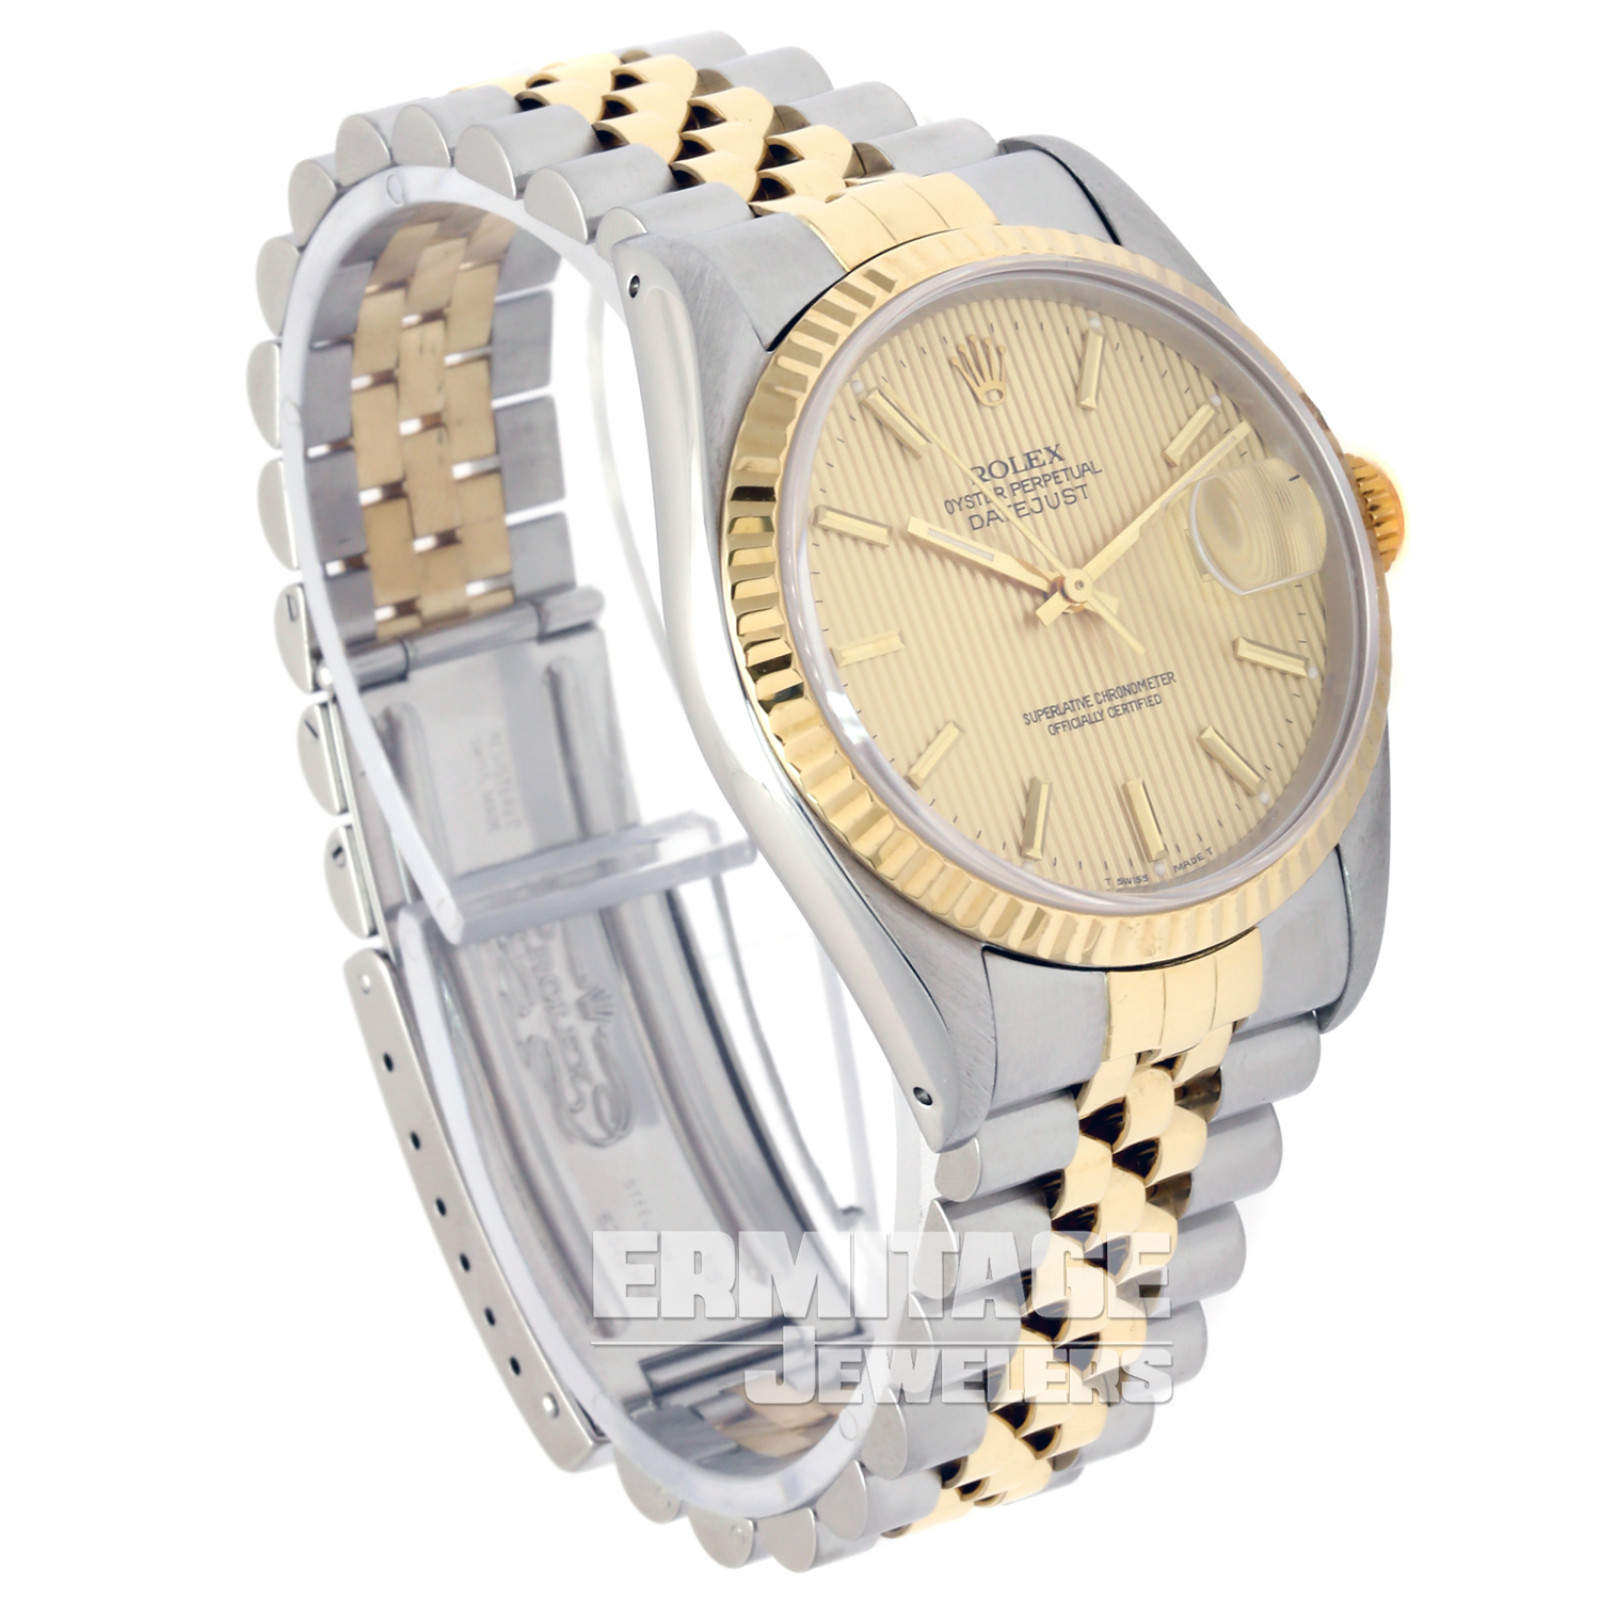 Gold & Steel Rolex Datejust 16233 Tapestry Dial